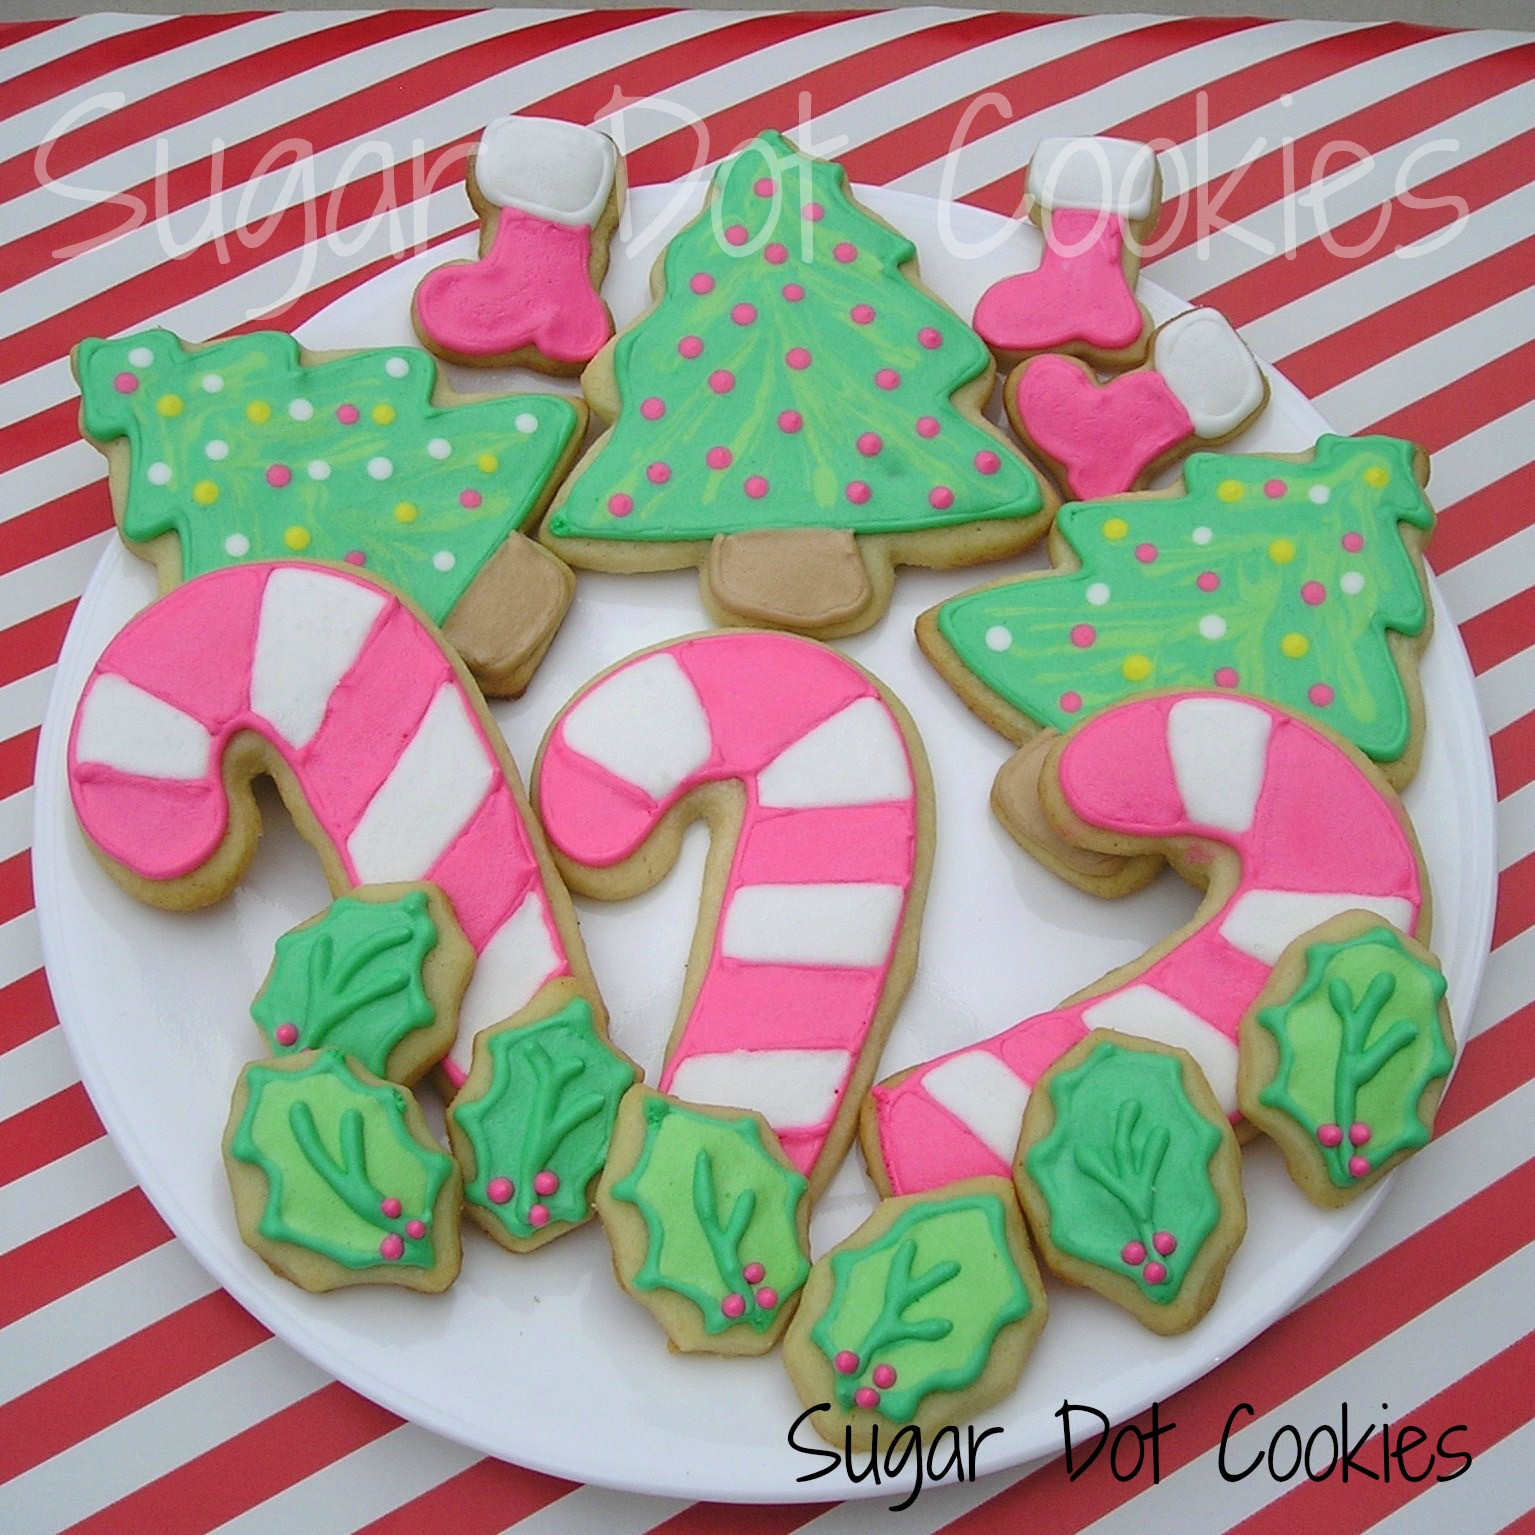 Christmas Sugar Cookies Decorating Ideas
 Would you like to see last year s collection My first